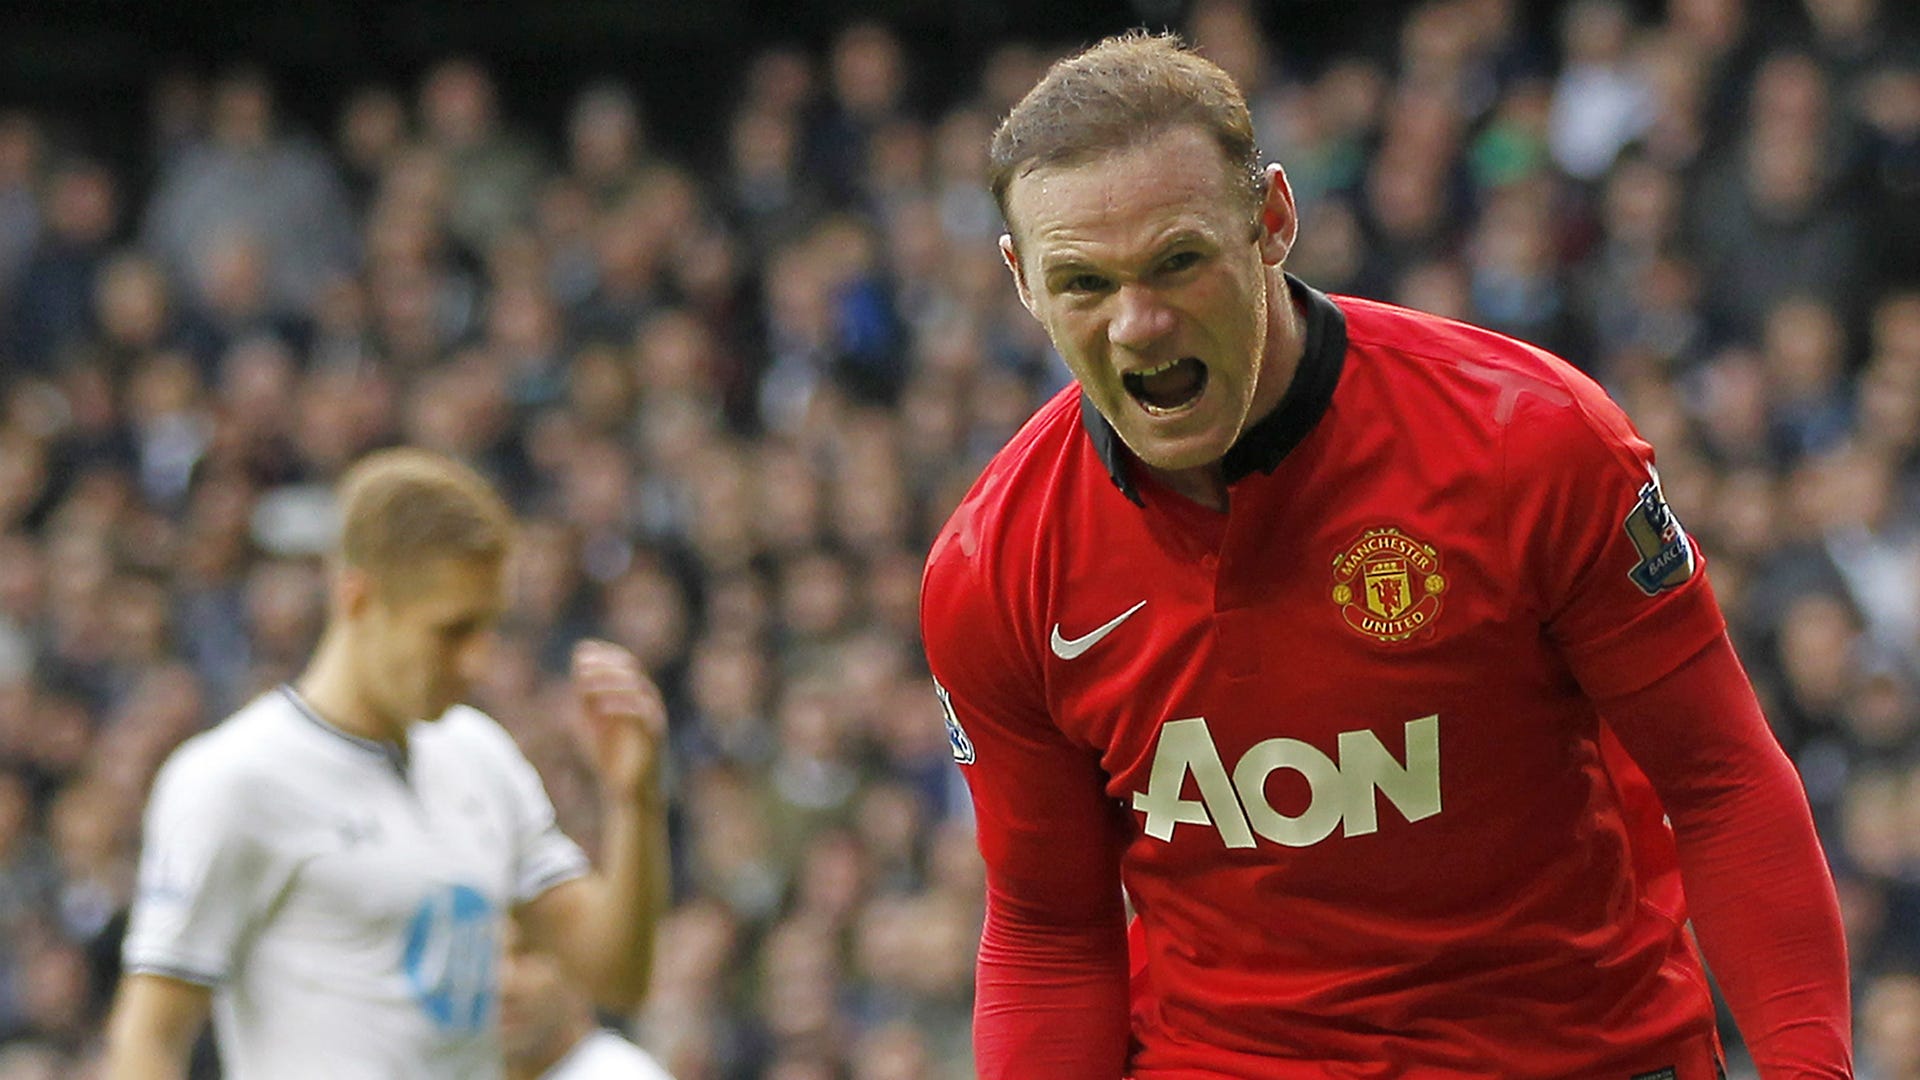 Manchester United all time top scorers: Rooney leads way | Goal.com US